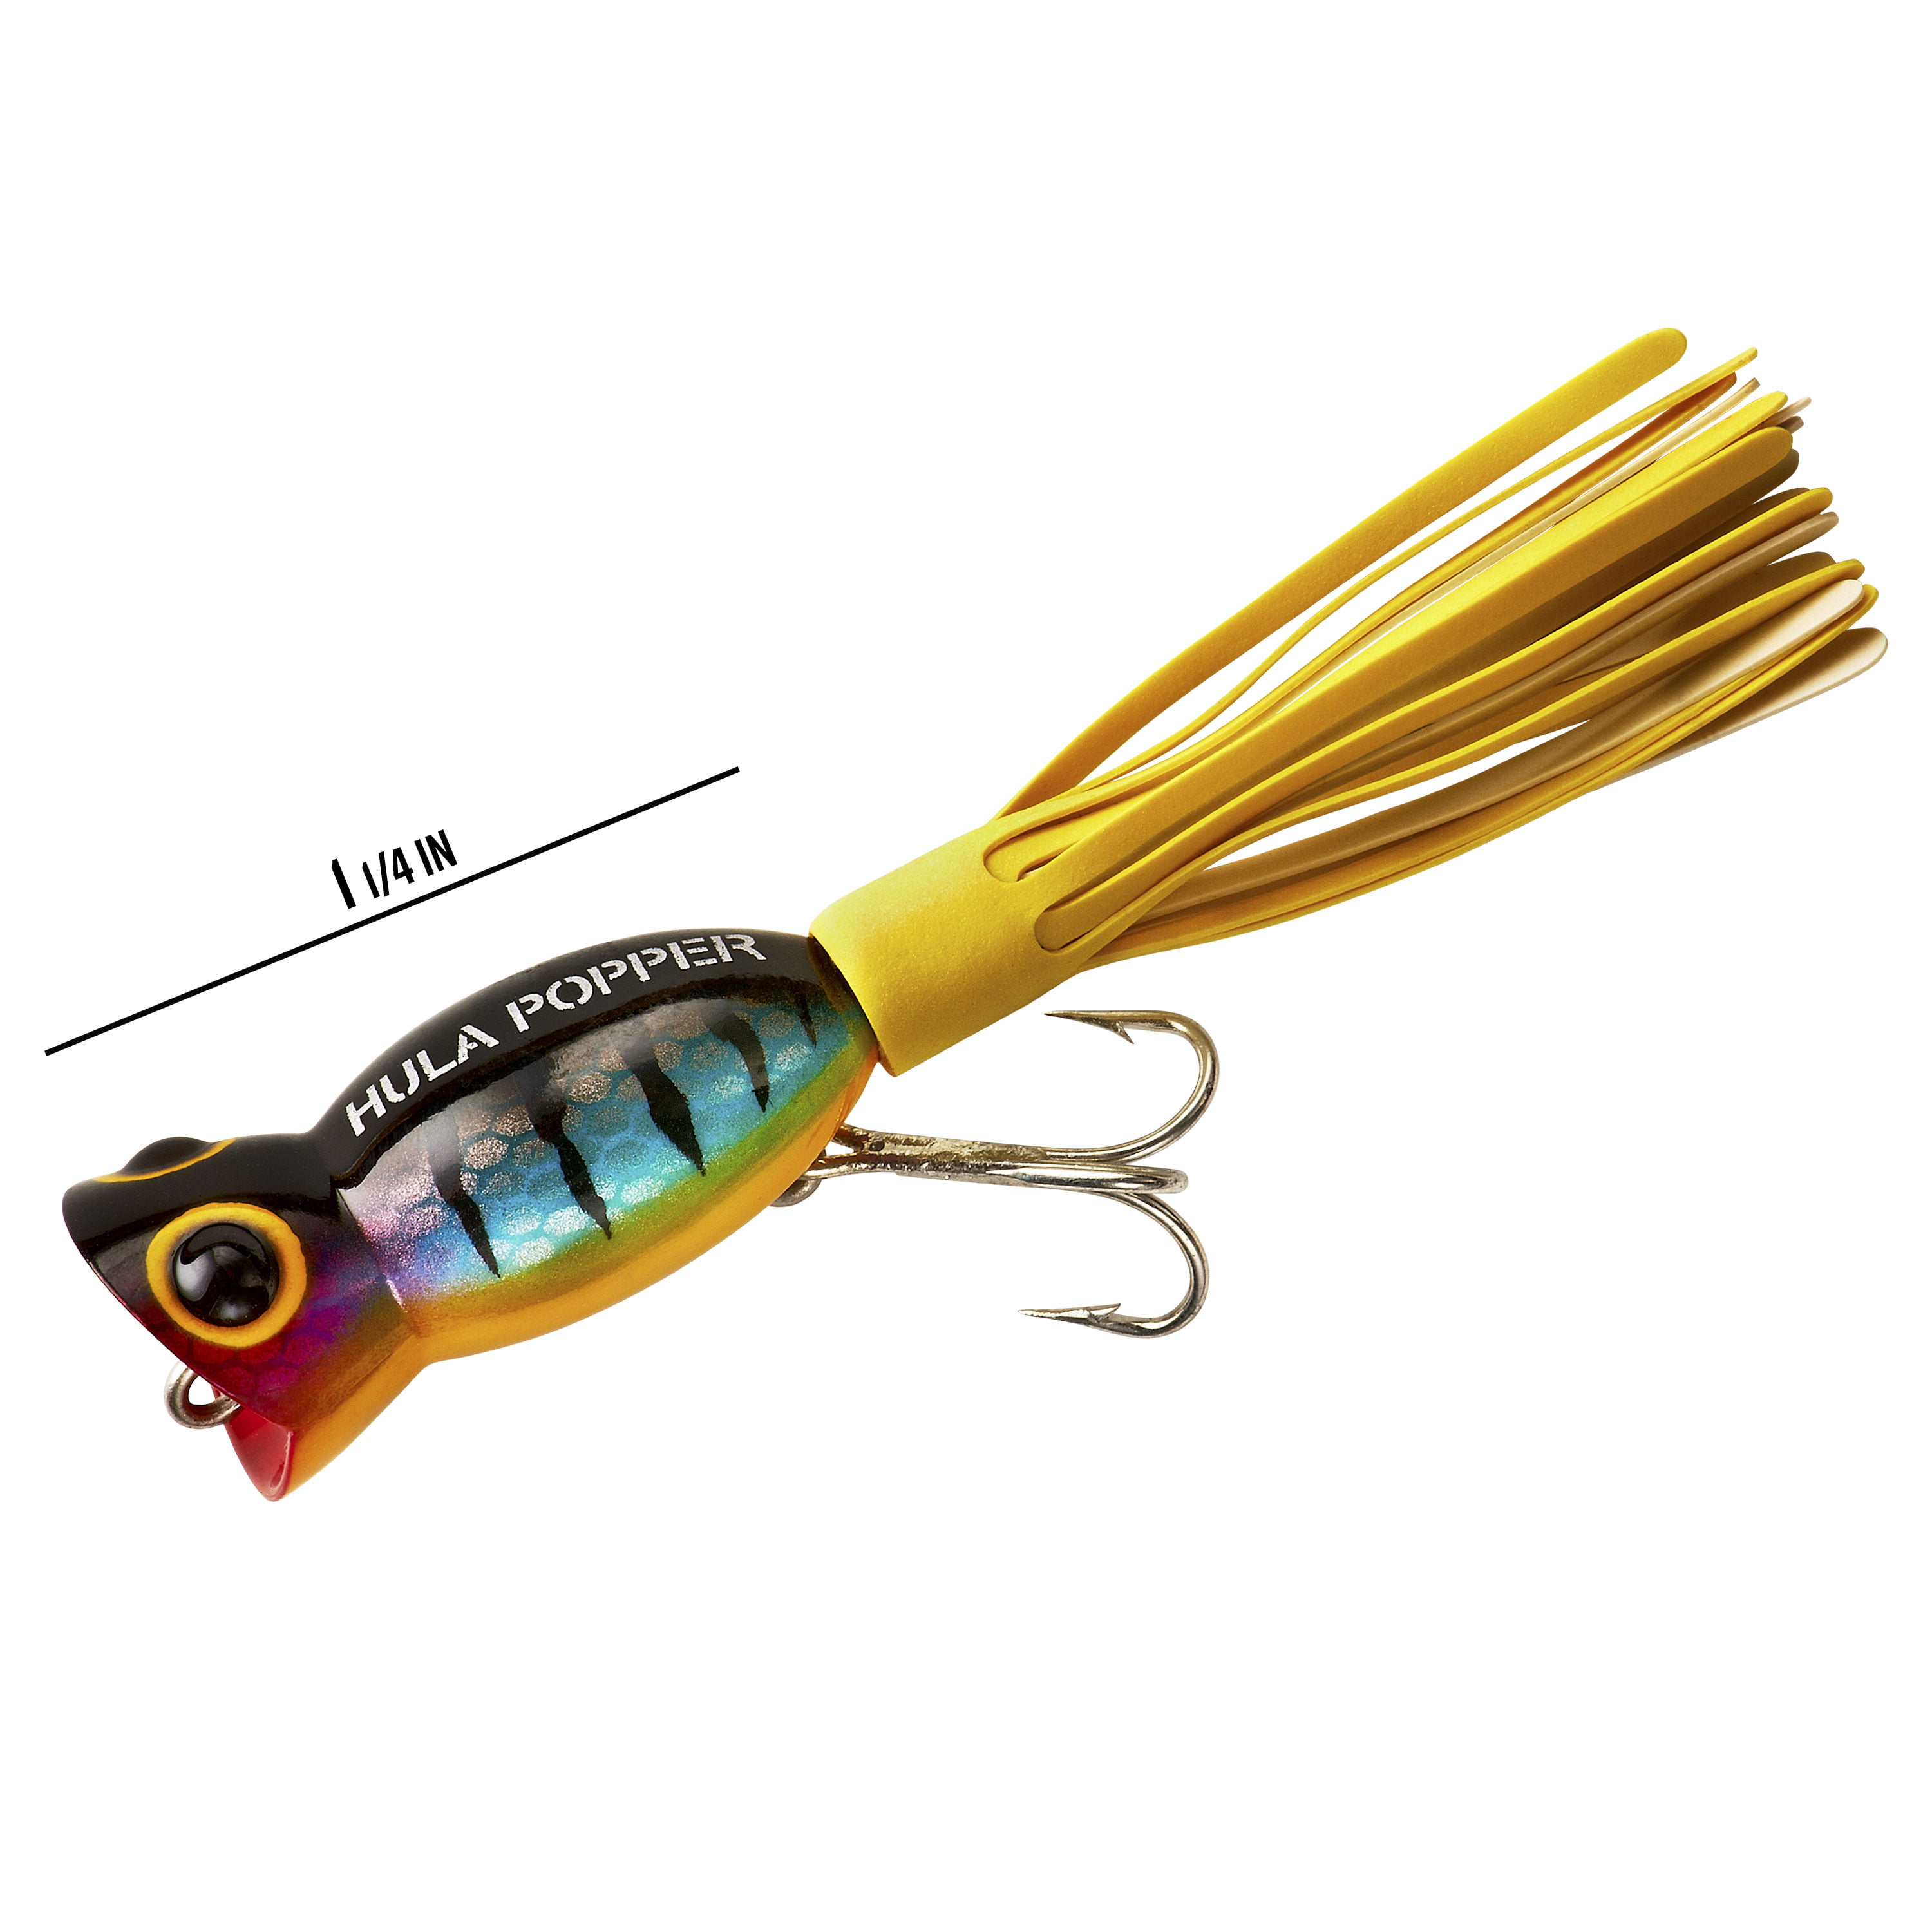 Arbogast Hula Popper Topwater Baits 1 1/4 Perch 3/16 oz.